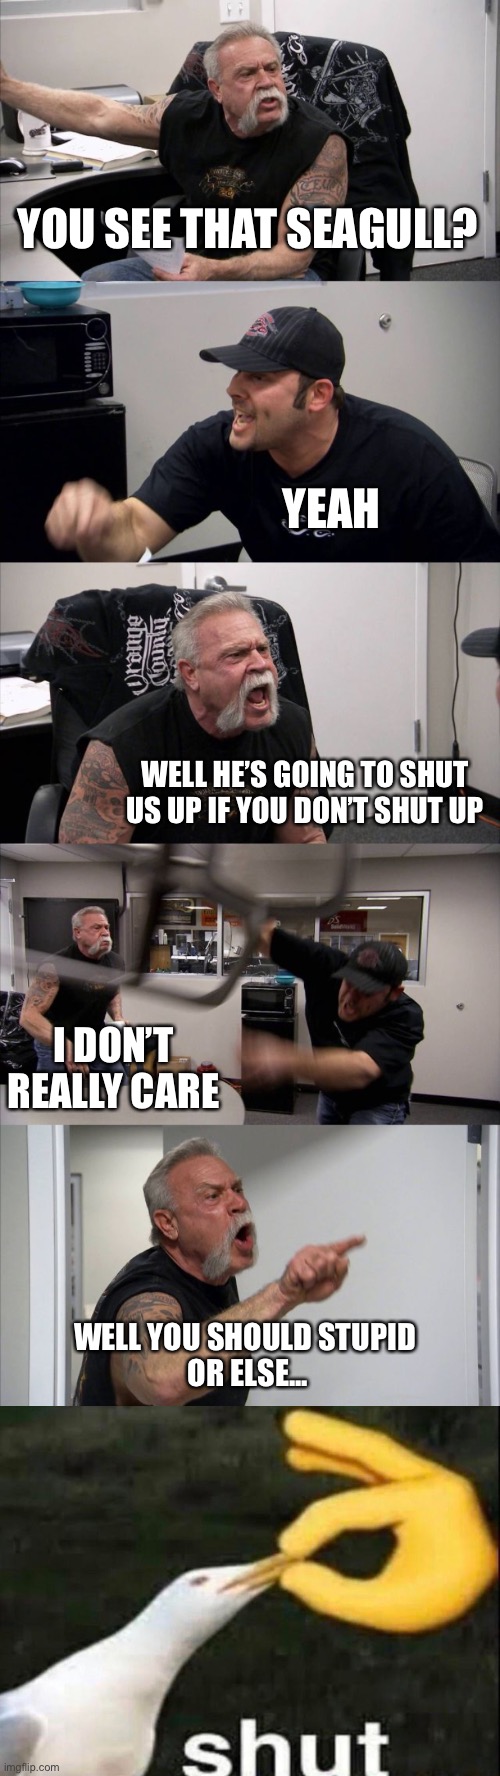 Lol | YOU SEE THAT SEAGULL? YEAH; WELL HE’S GOING TO SHUT US UP IF YOU DON’T SHUT UP; I DON’T REALLY CARE; WELL YOU SHOULD STUPID 
OR ELSE... | image tagged in memes,american chopper argument,shut | made w/ Imgflip meme maker